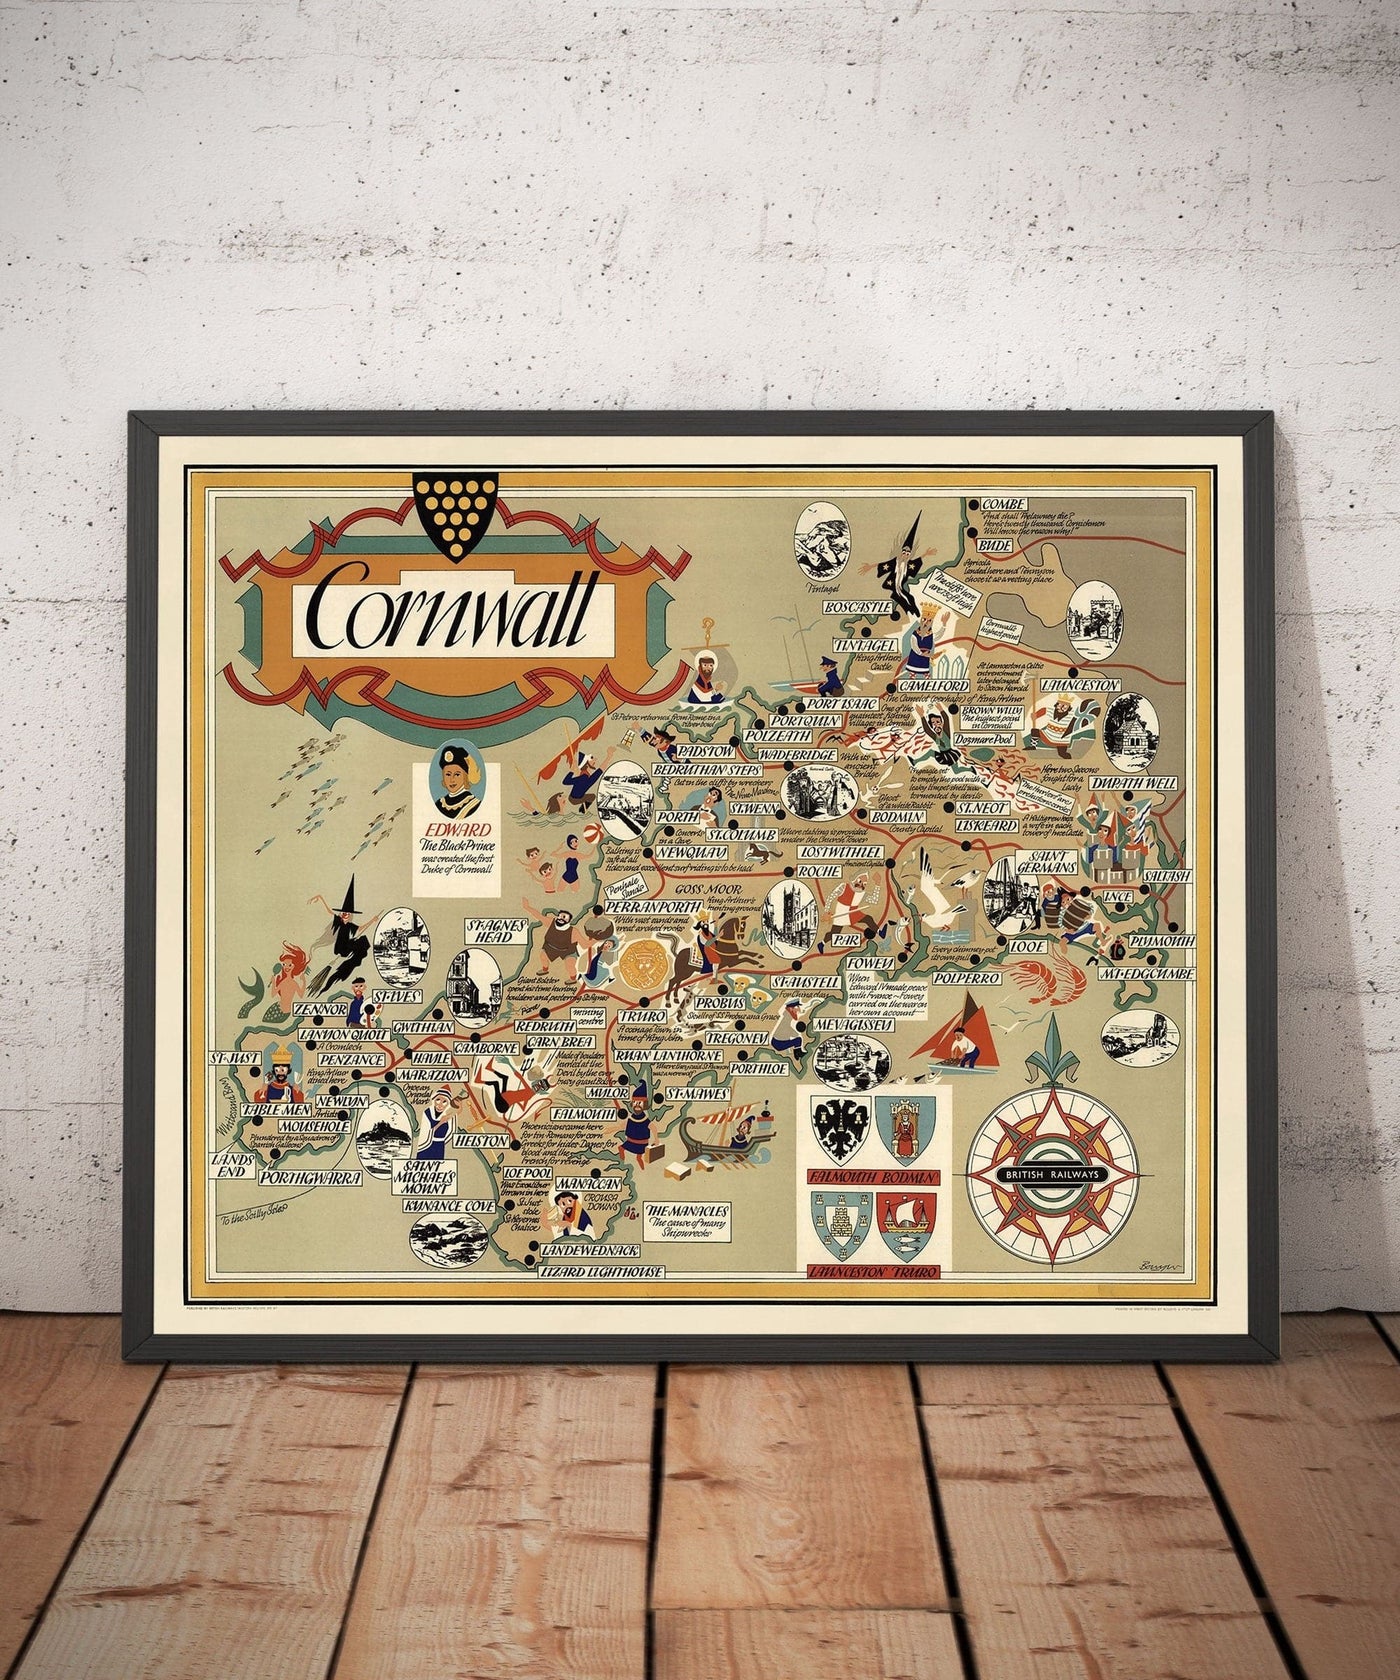 Old Pictorial Map of Cornwall, 1950 par Bowyer - British Railway, St Ives, Newquay, Plymouth, Truro, West Country